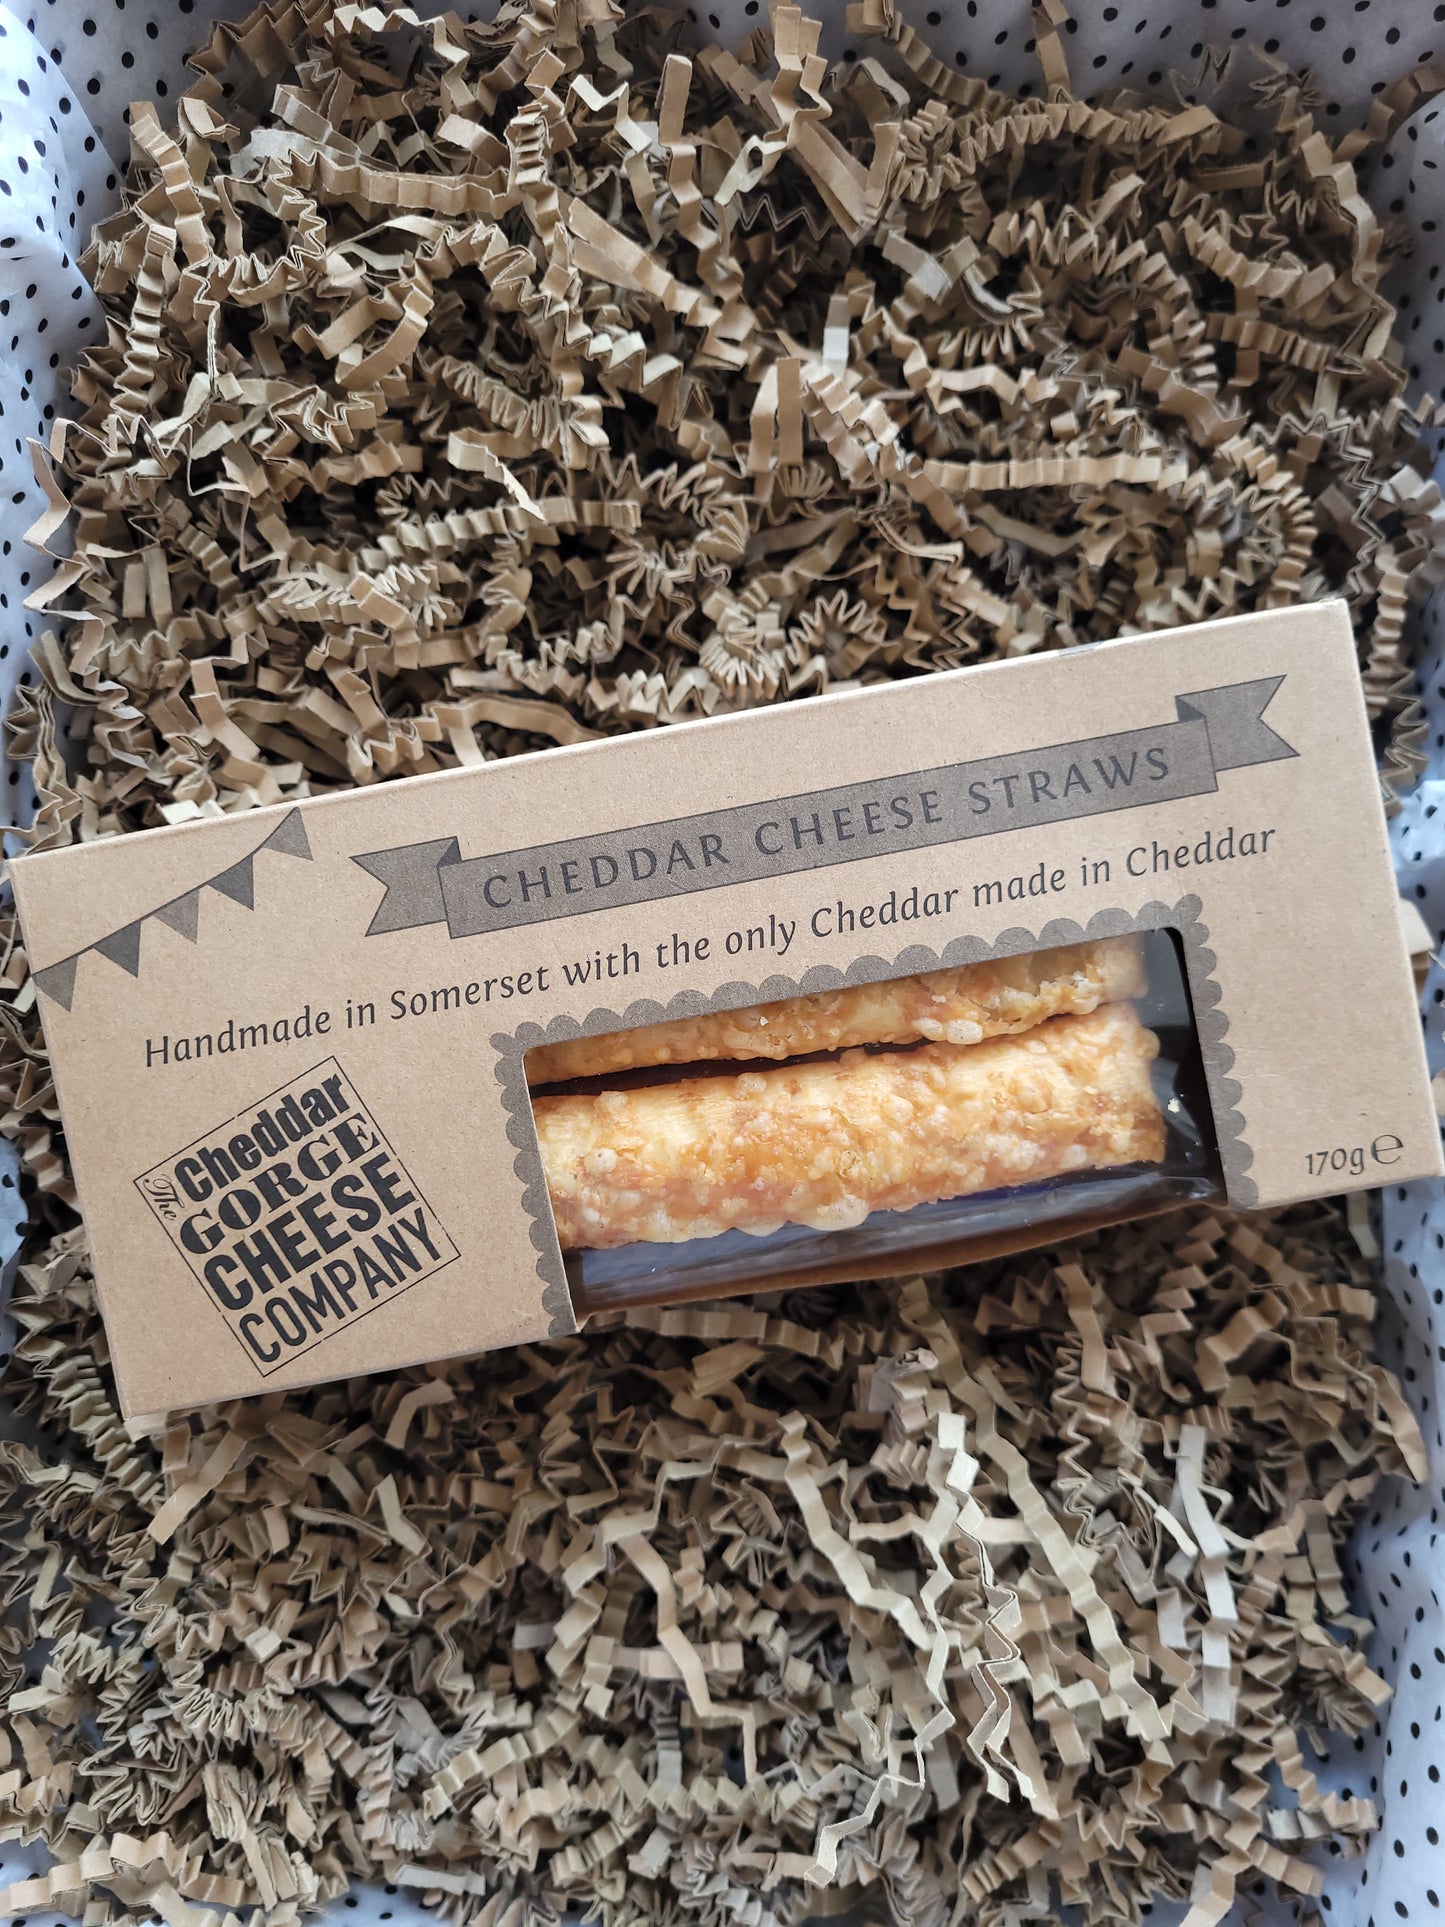 The Cheddar Gorge Cheese Co. 5 Cheese Straws